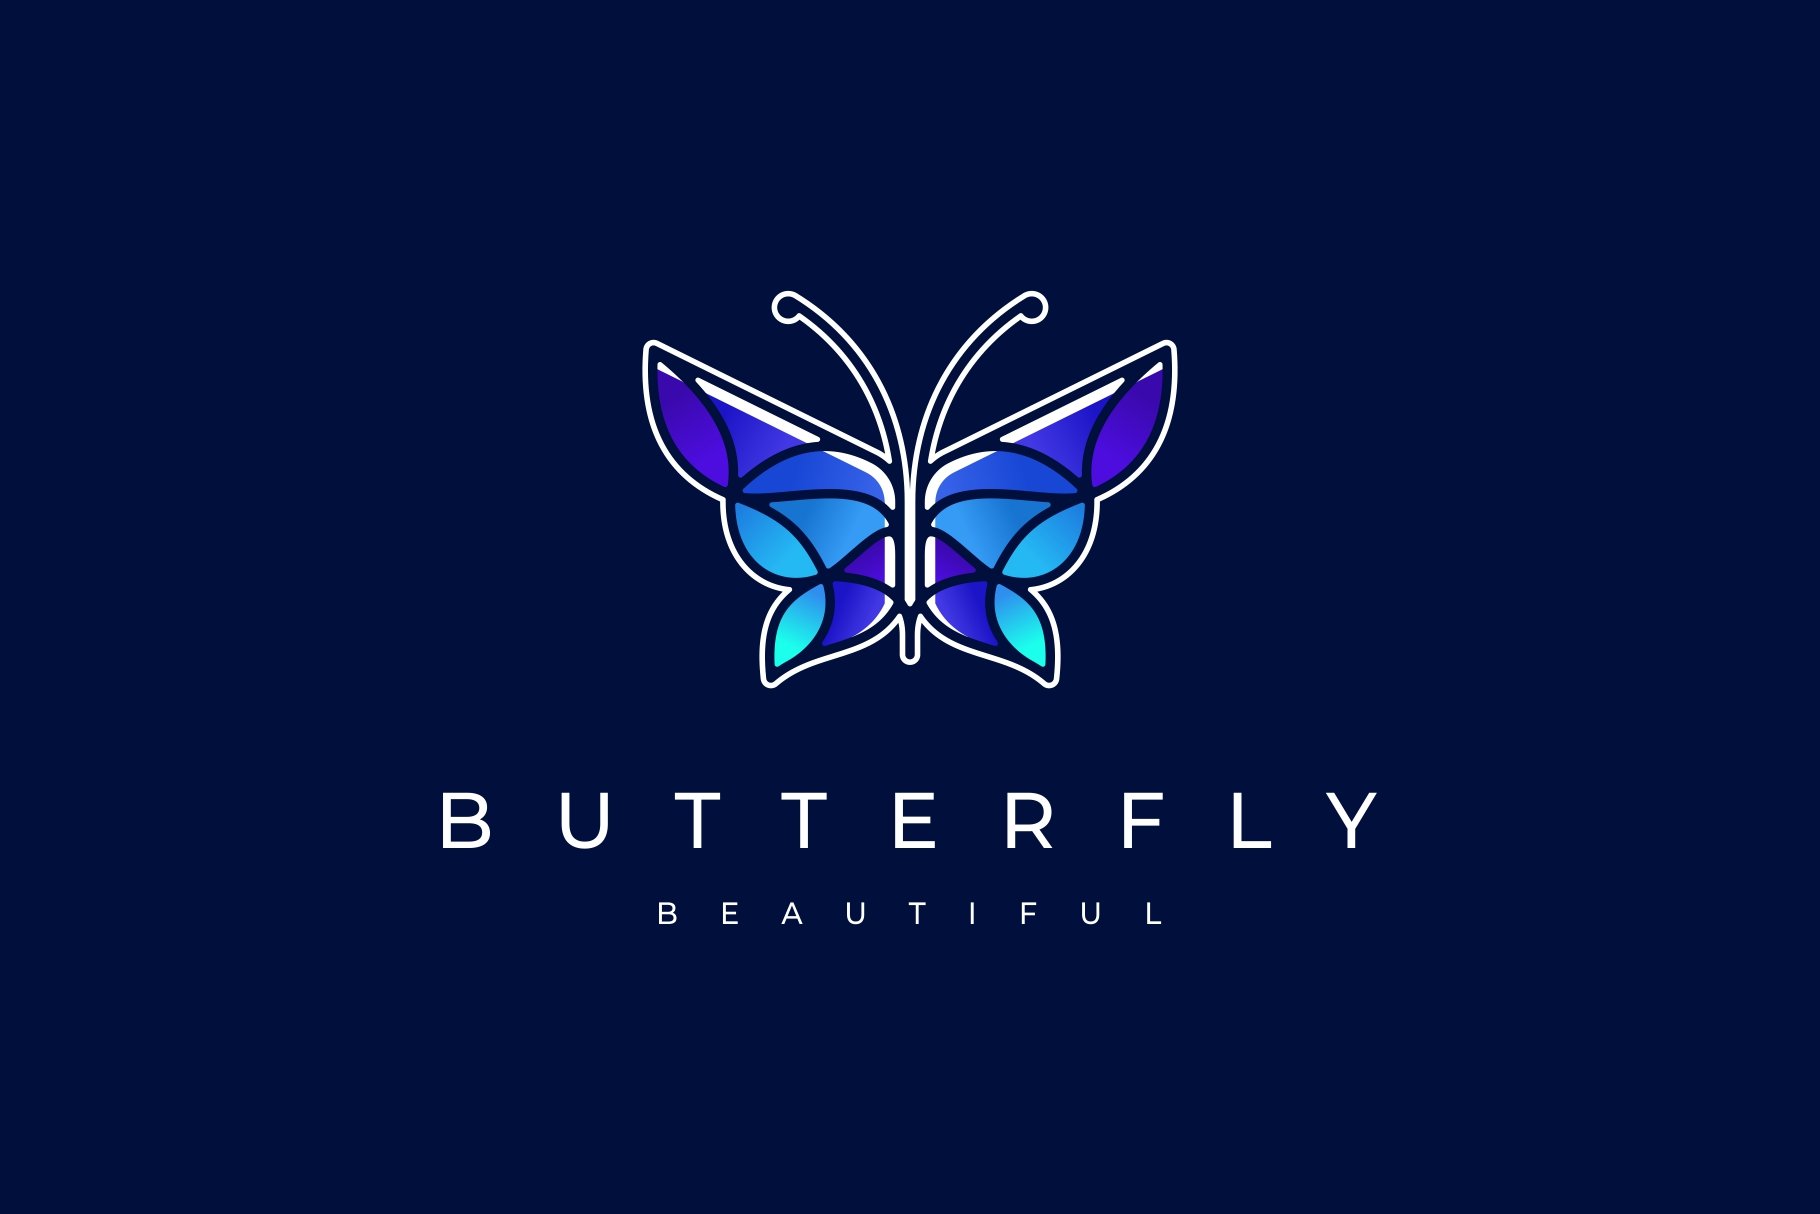 Butterfly Colorful Beautiful Logo cover image.